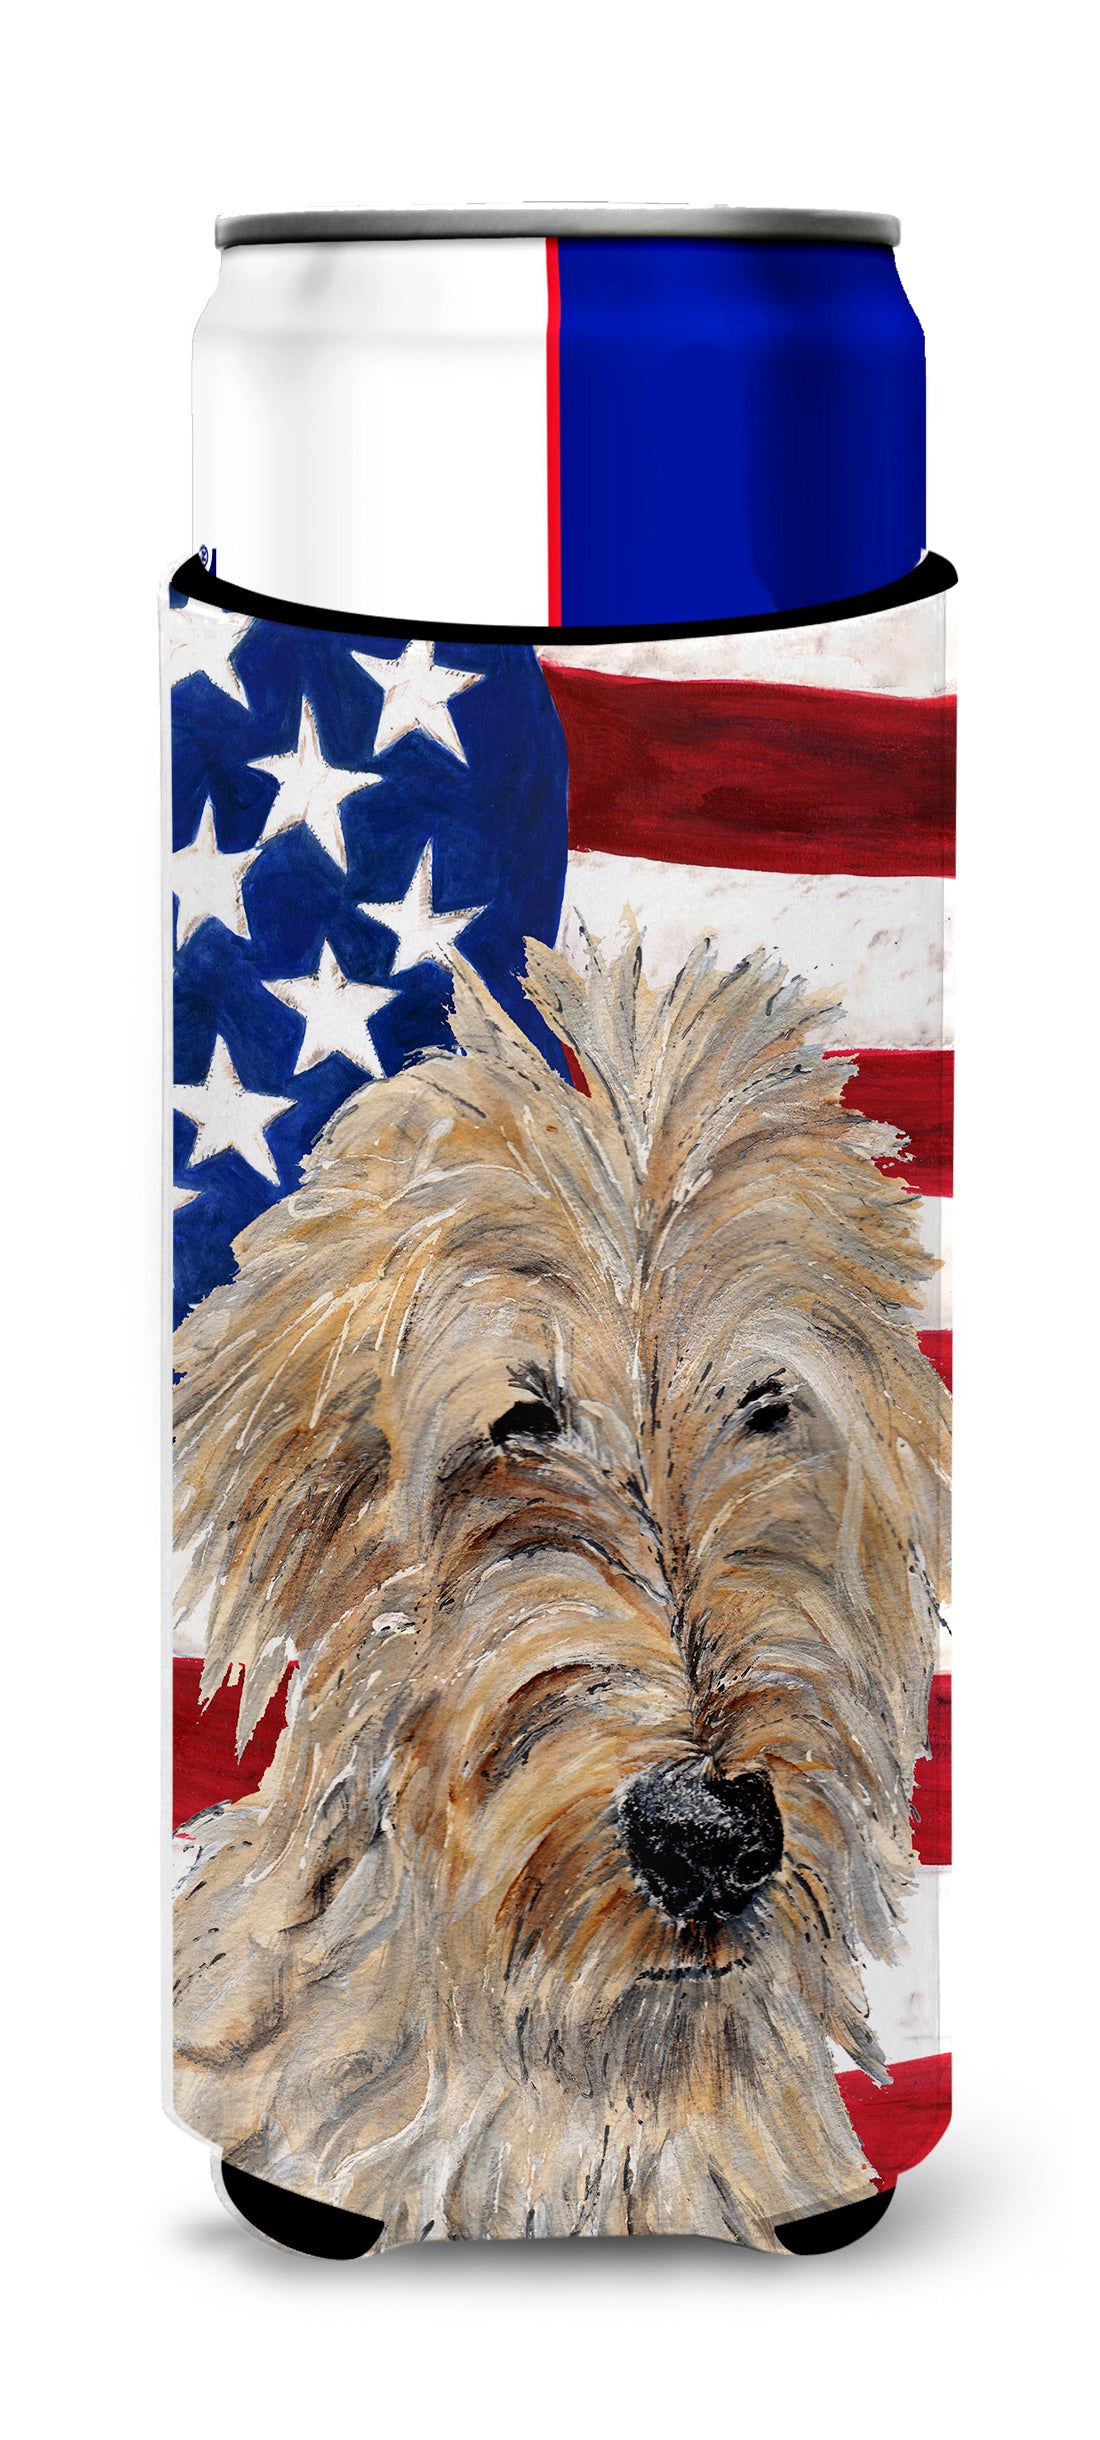 Golden Doodle 2 with American Flag USA Ultra Beverage Insulators for slim cans SC9643MUK.